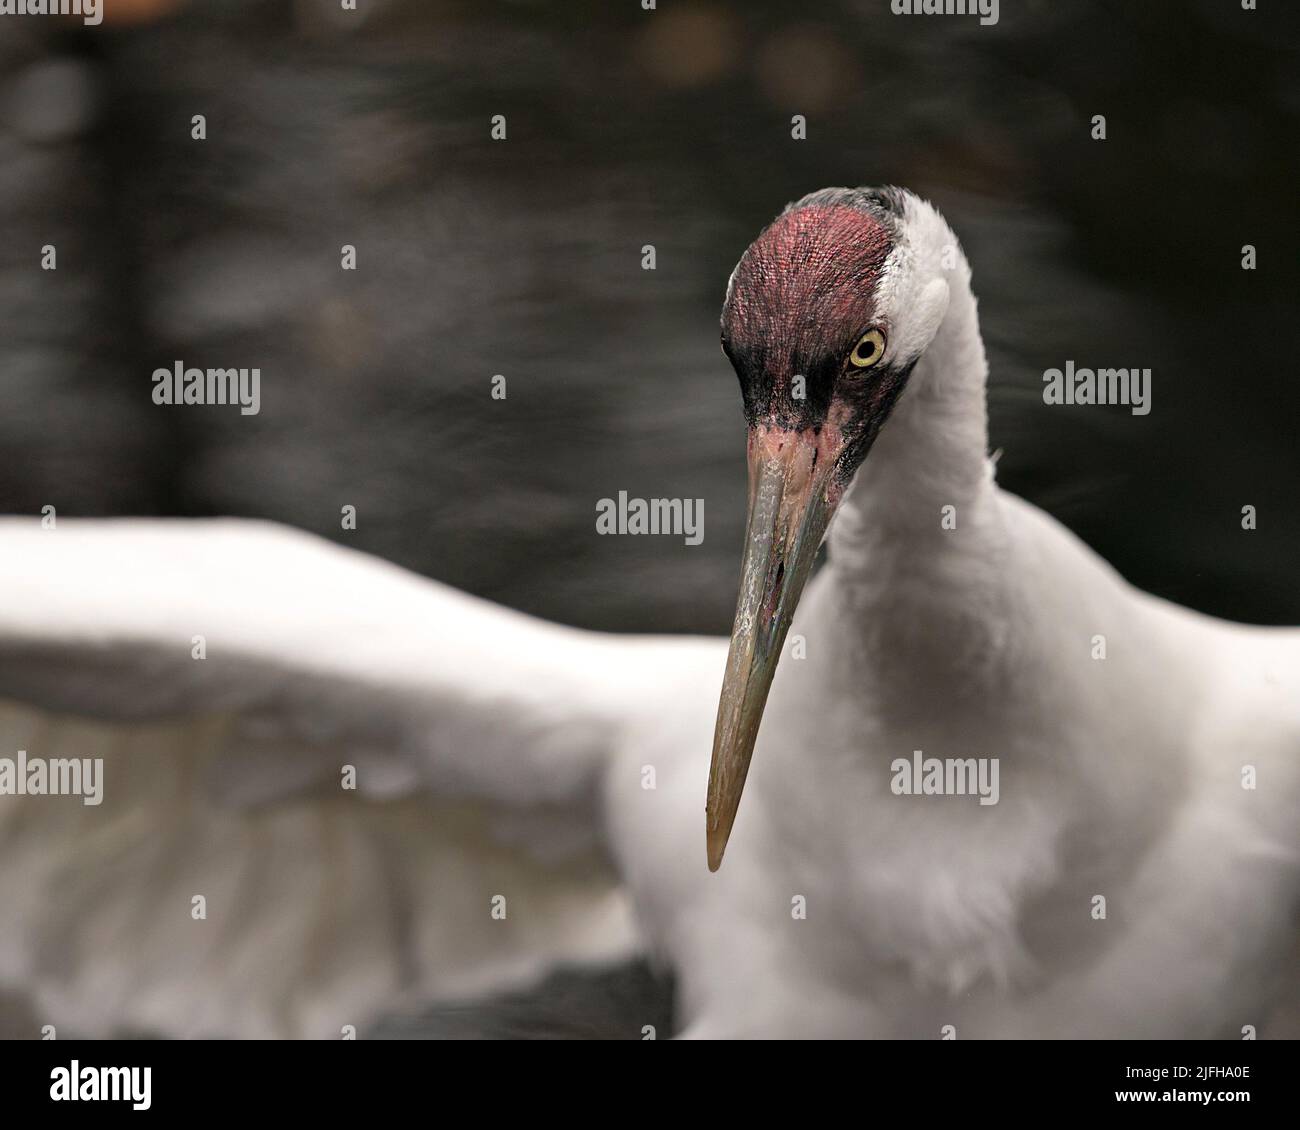 Whopping Crane head close-up profile view with spread wings with background displaying red crown on its head, eye, beak, white colour in its habitat. Stock Photo